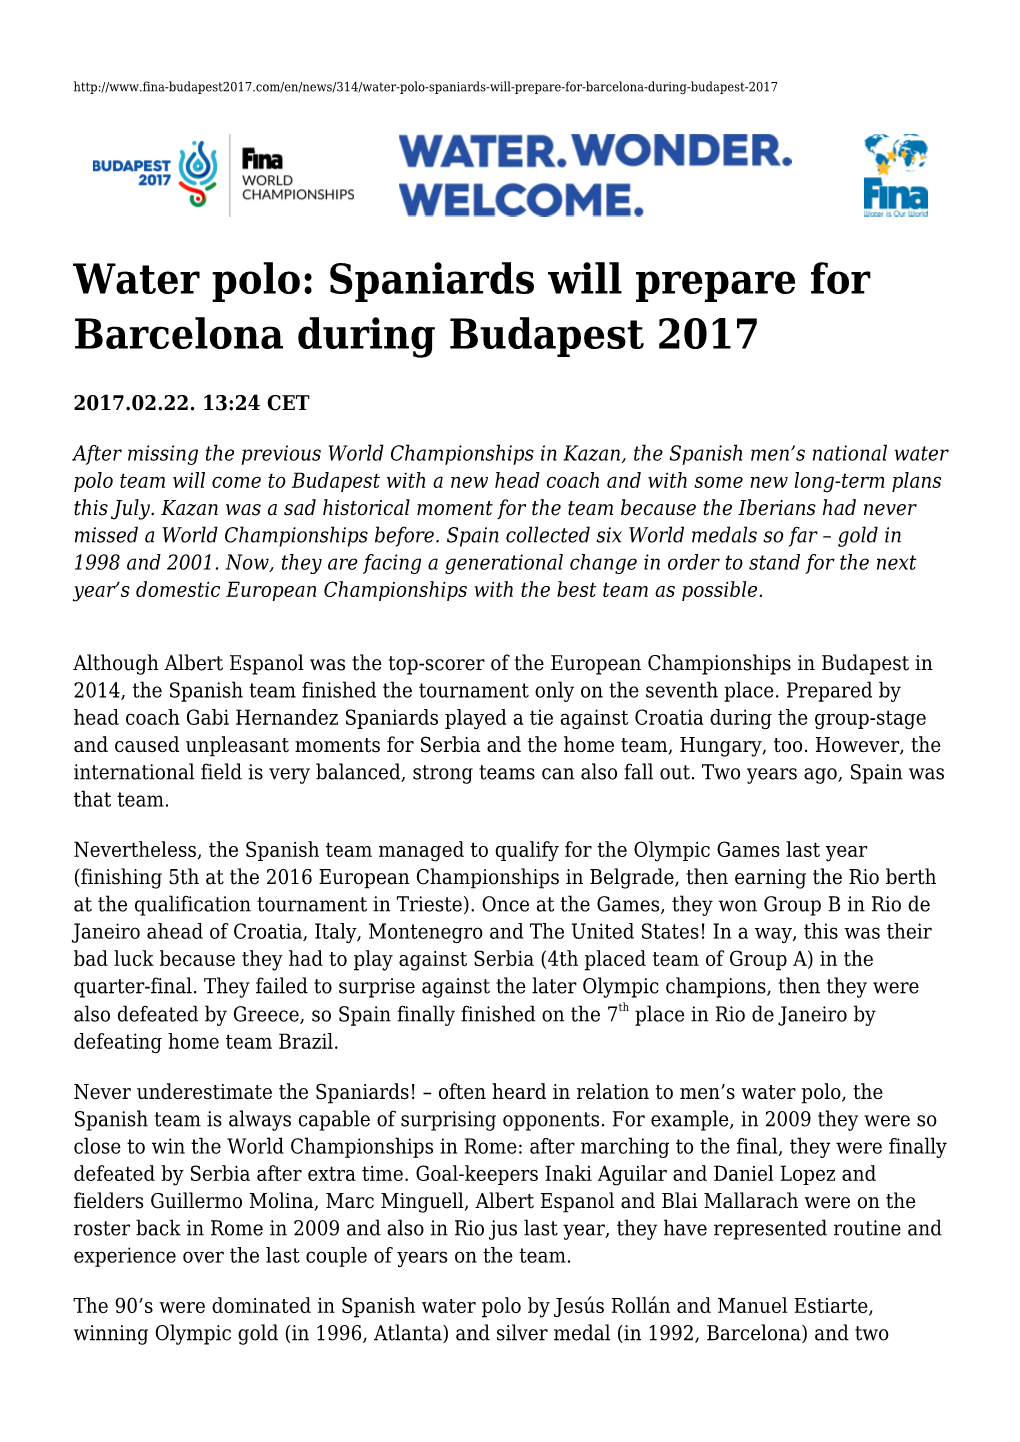 Water Polo: Spaniards Will Prepare for Barcelona During Budapest 2017